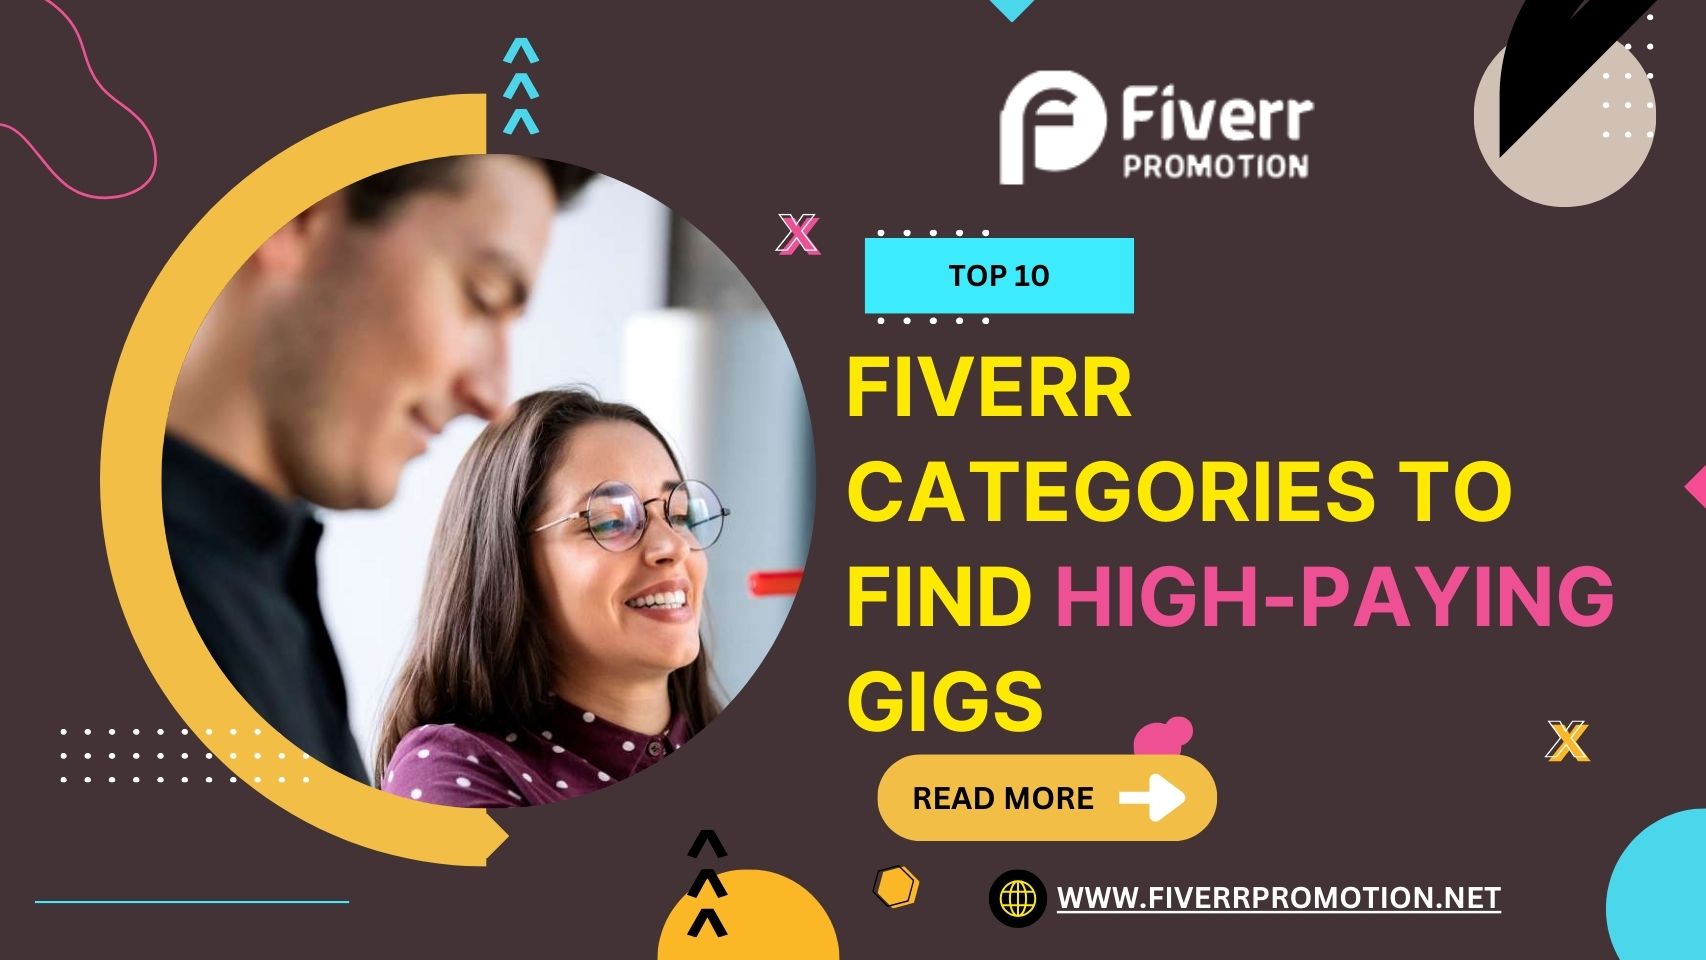 Top 10 Fiverr categories to find high-paying gigs